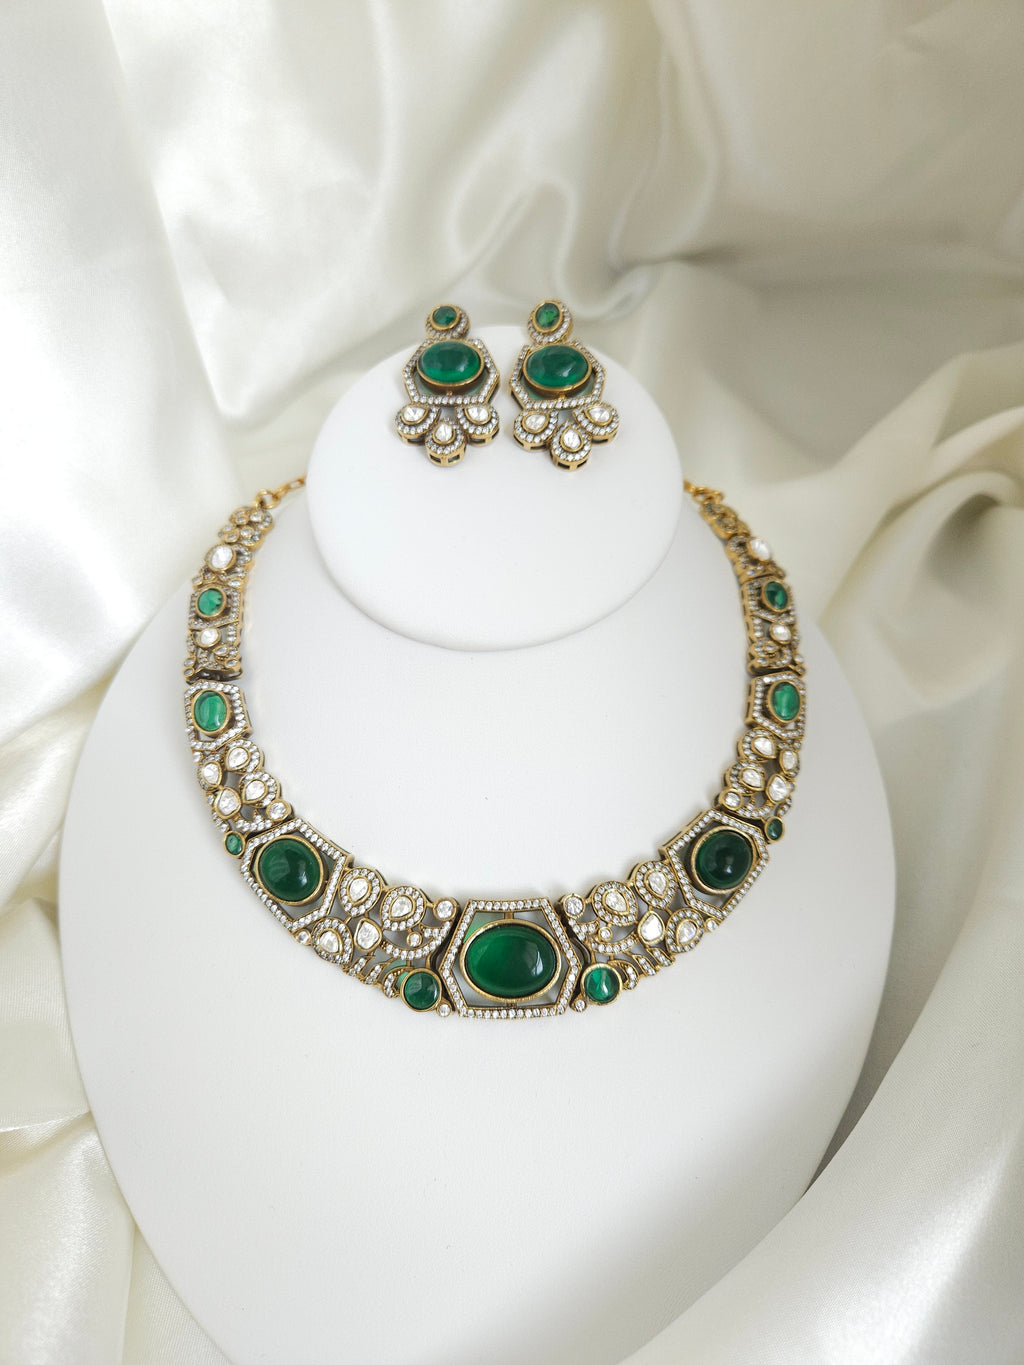 Victorian mossanite  hasli necklace with earrings